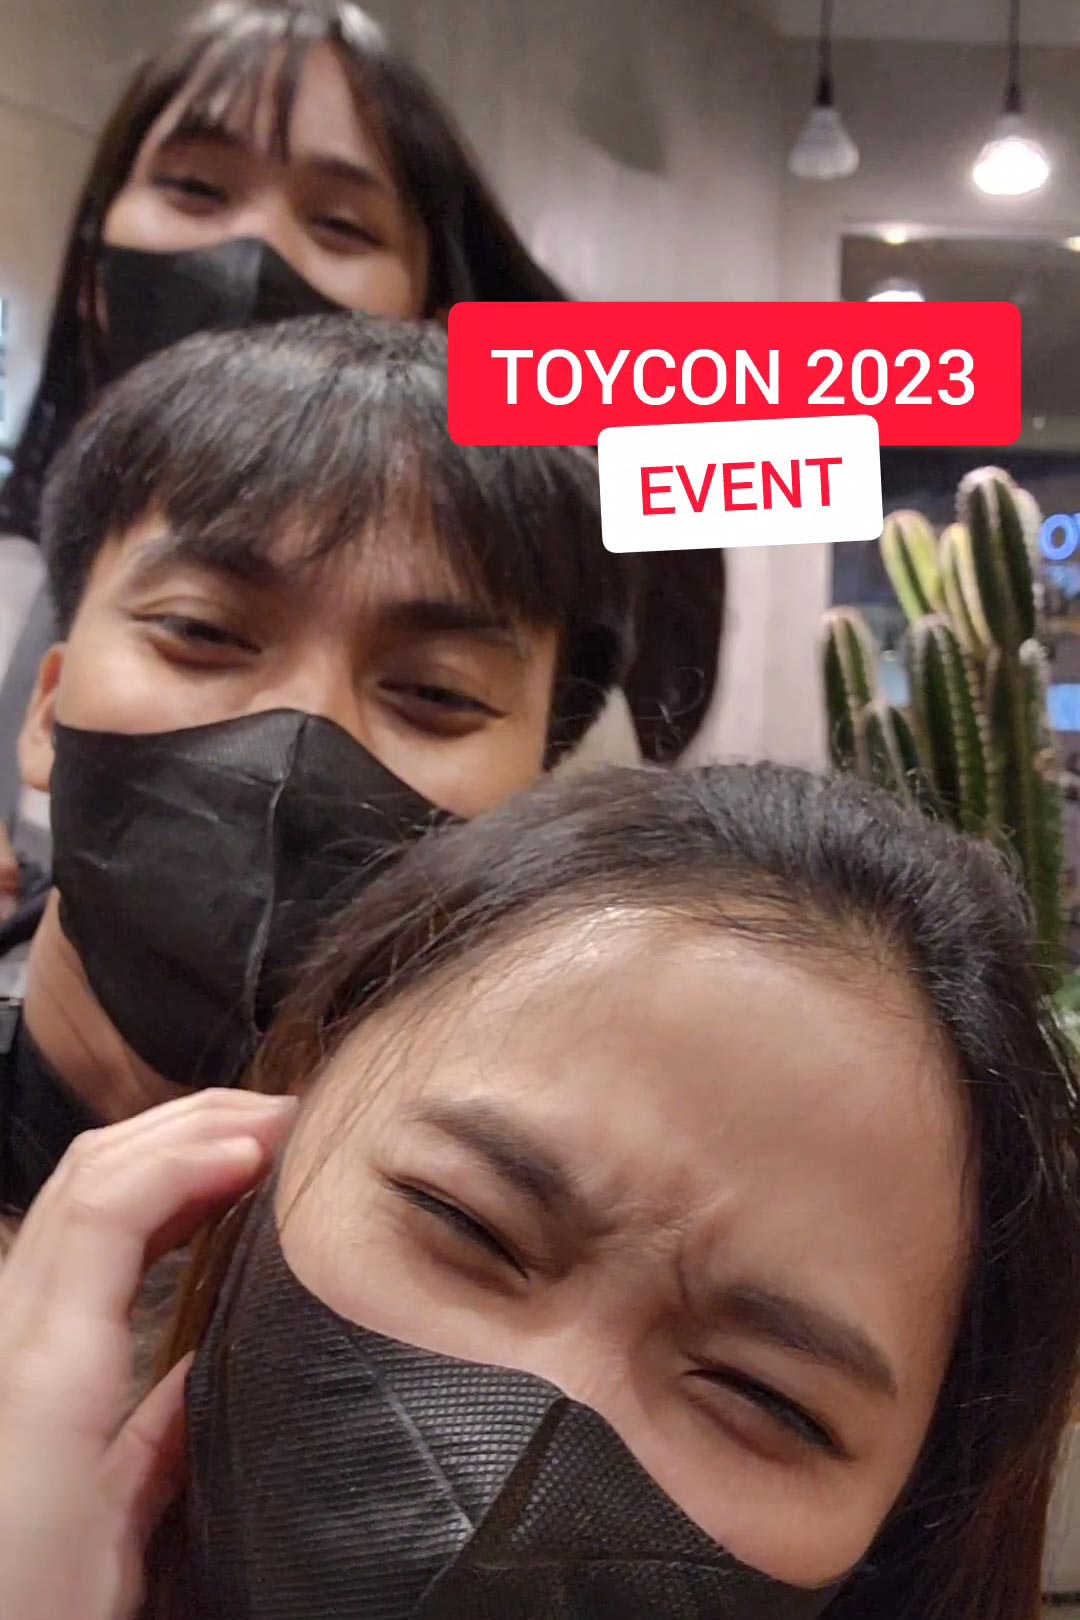 See you at ToyCon 2023!